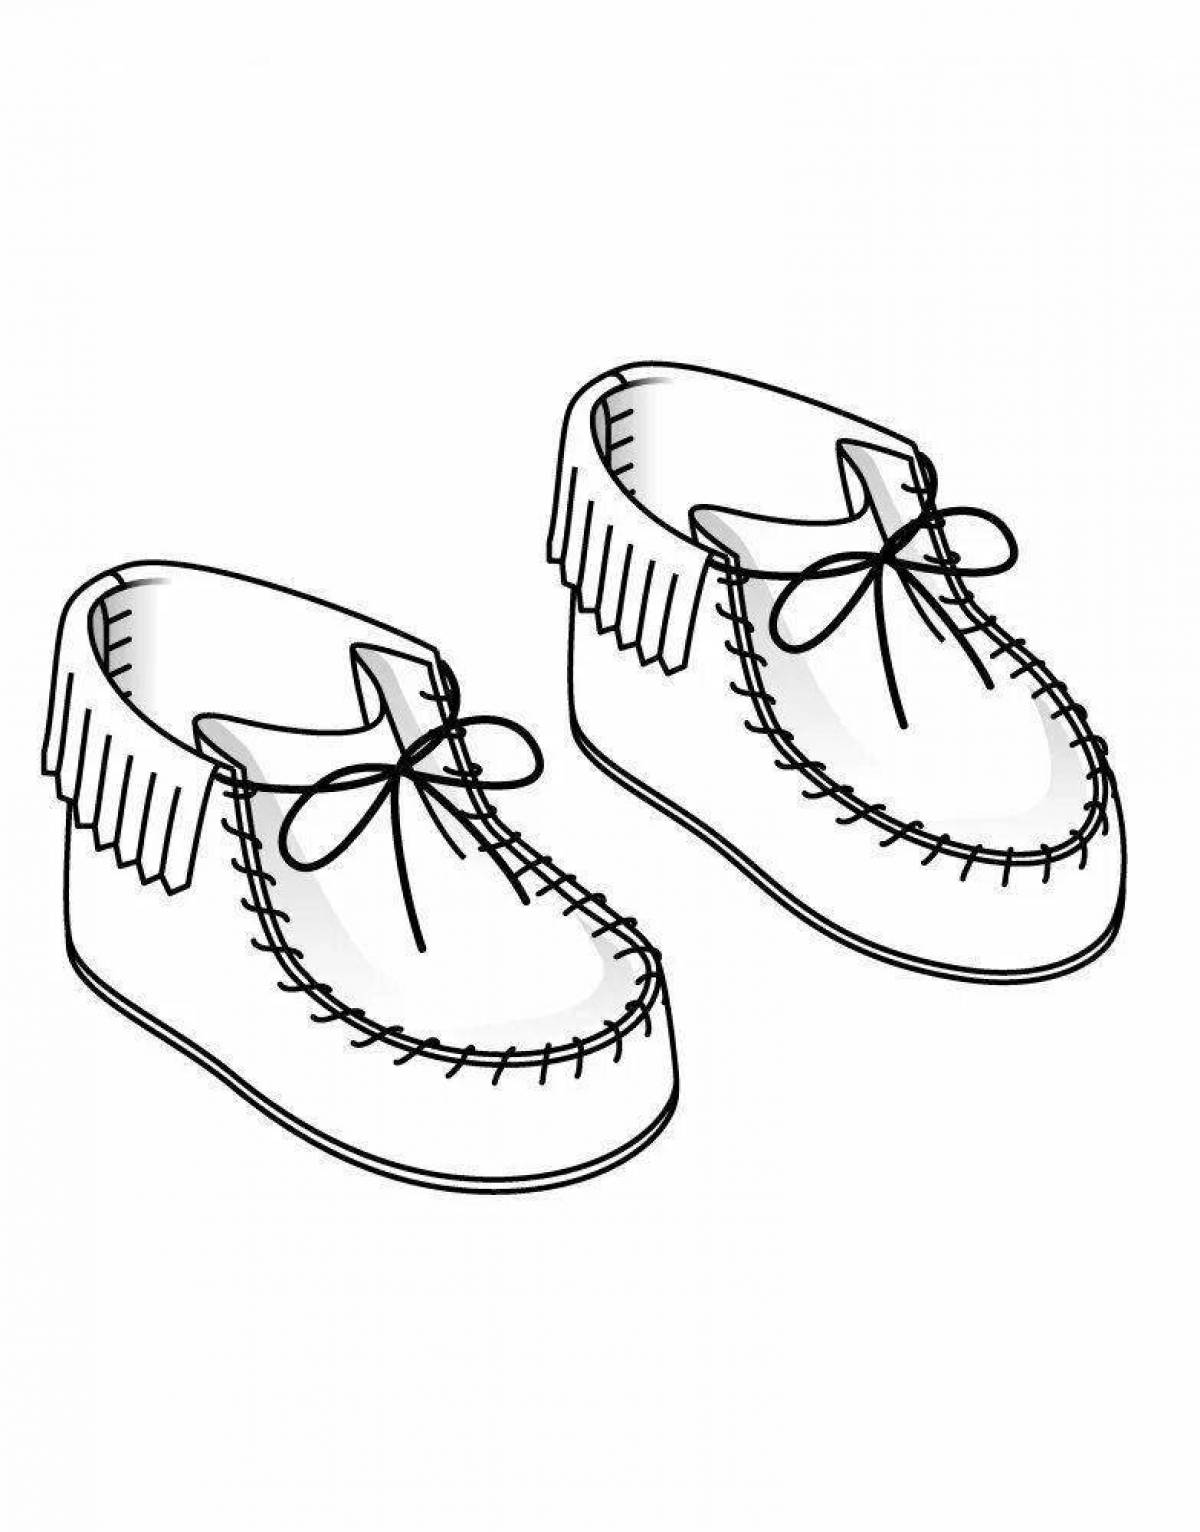 Coloring page attractive shoes for children 5-6 years old